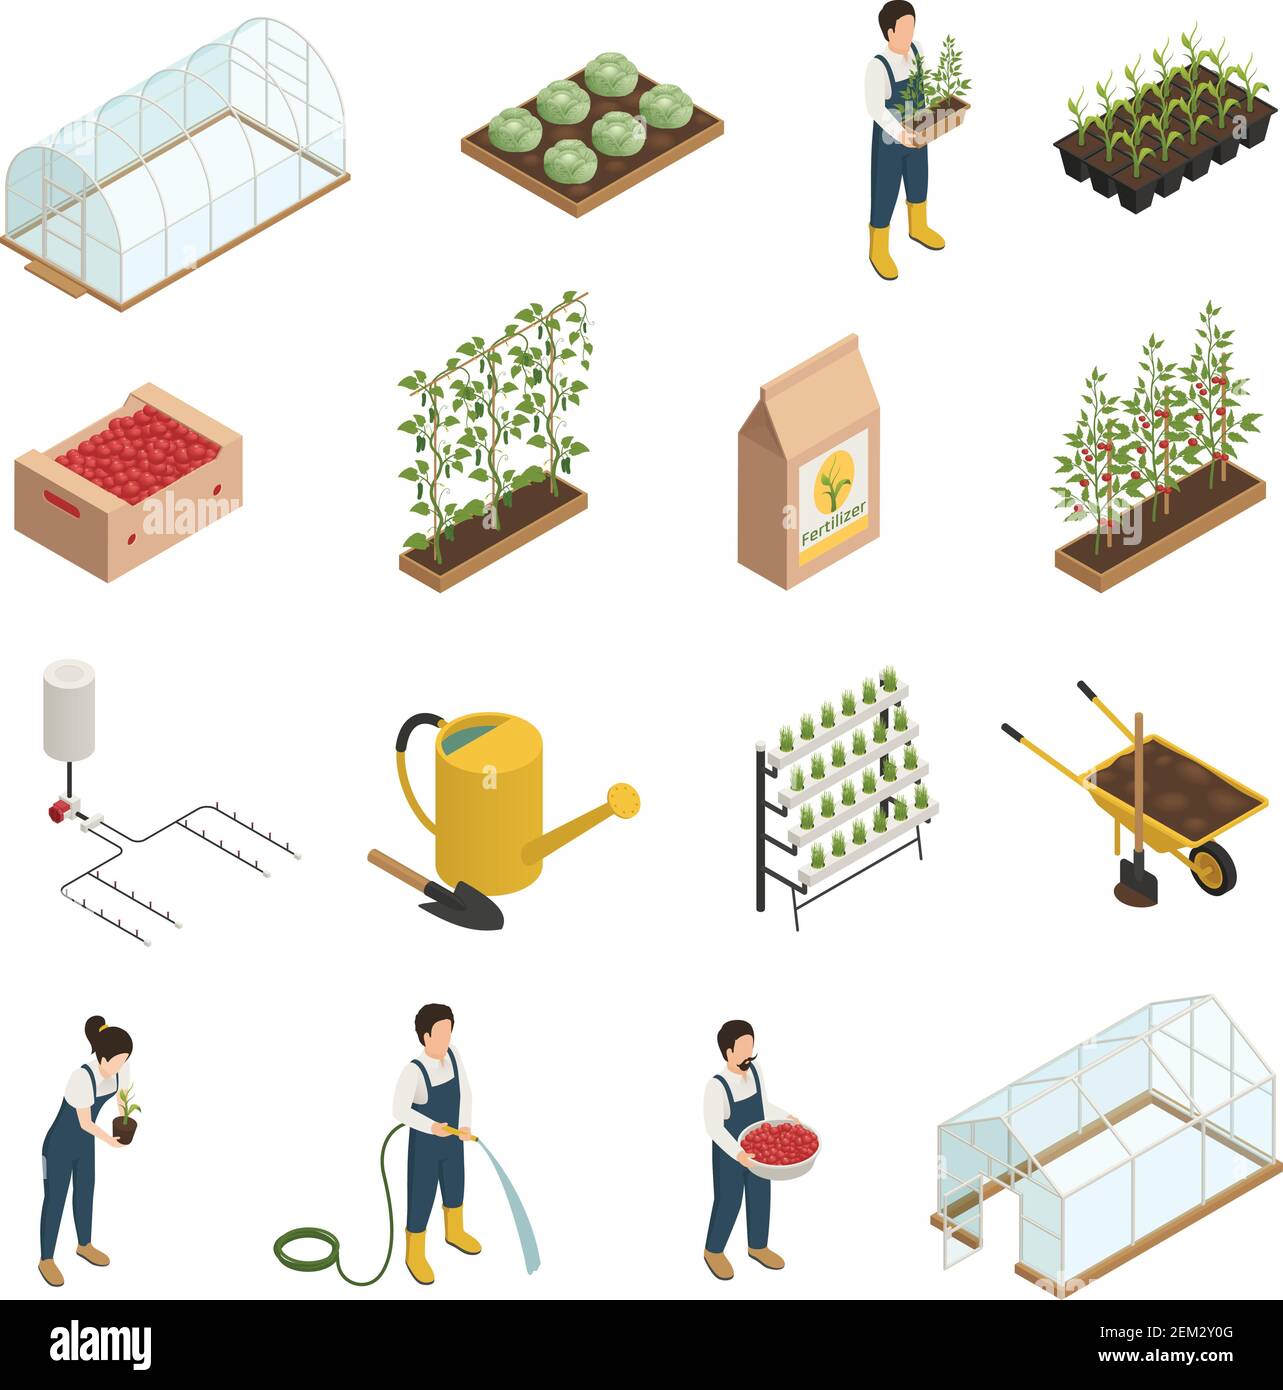 Greenhouse facilities personnel tools equipment plants accessories isometric icons set with wheelbarrow Stock Vector